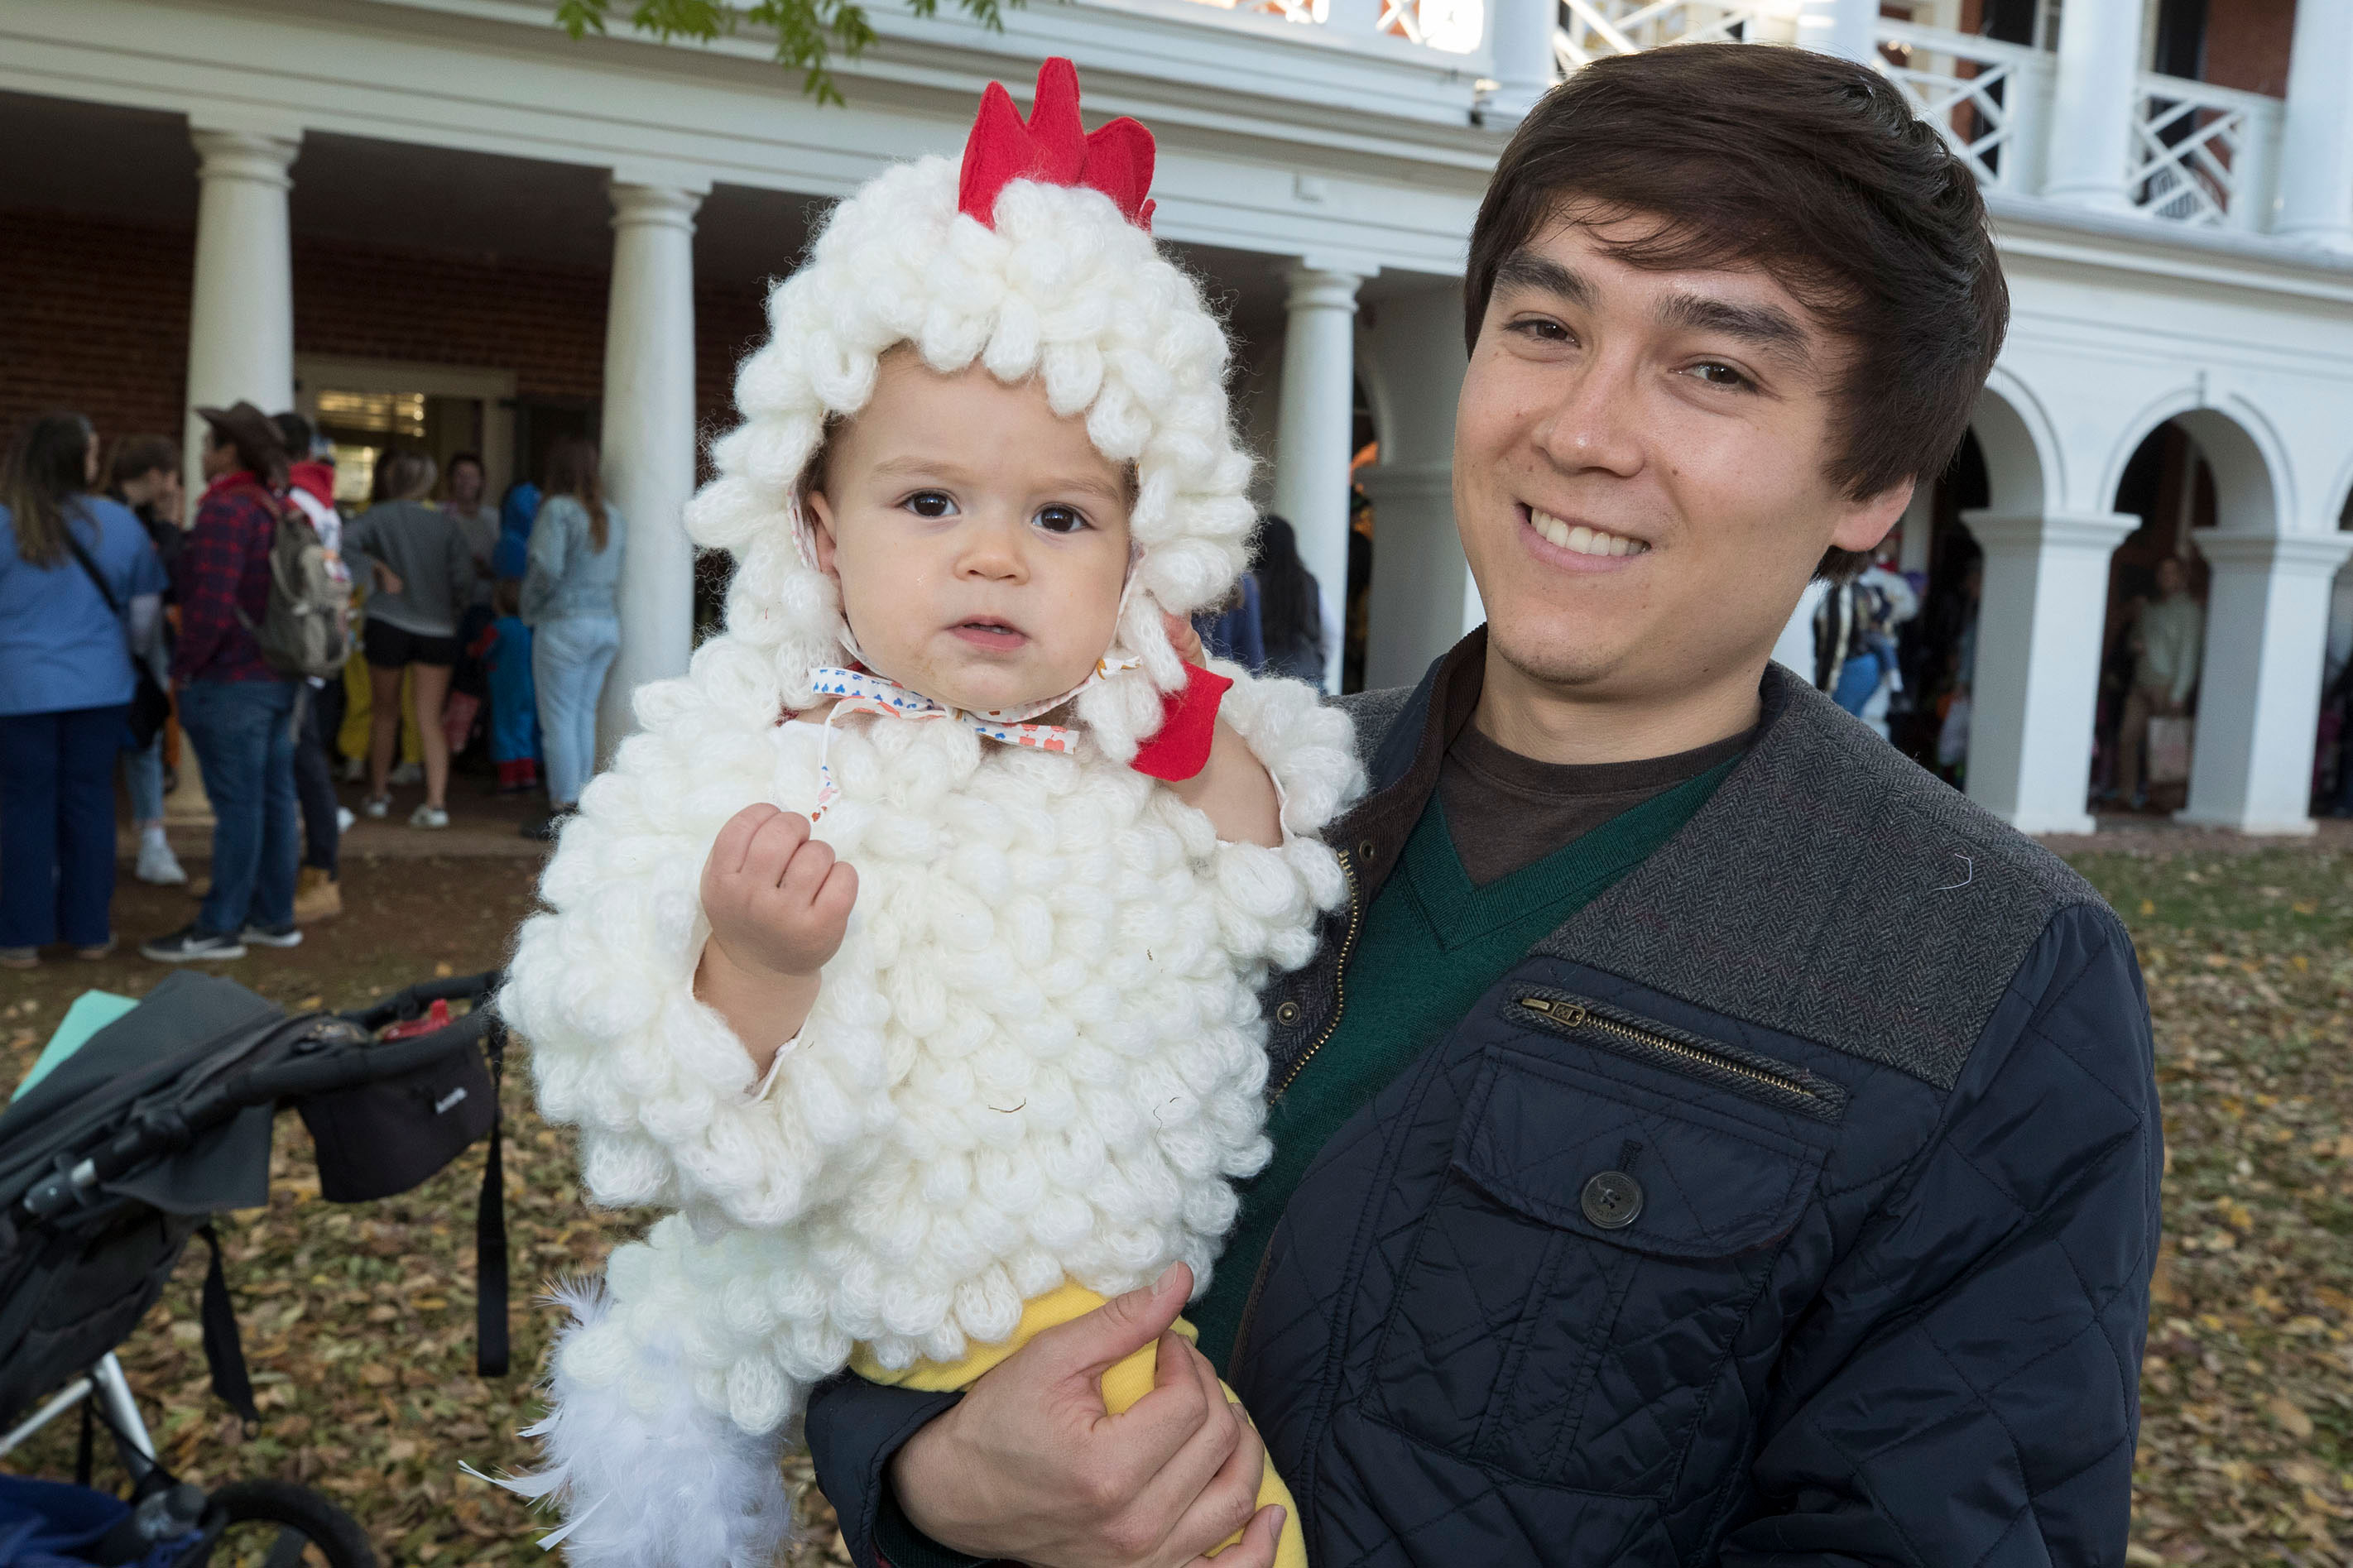 Student holds a baby dressed up as a chicken